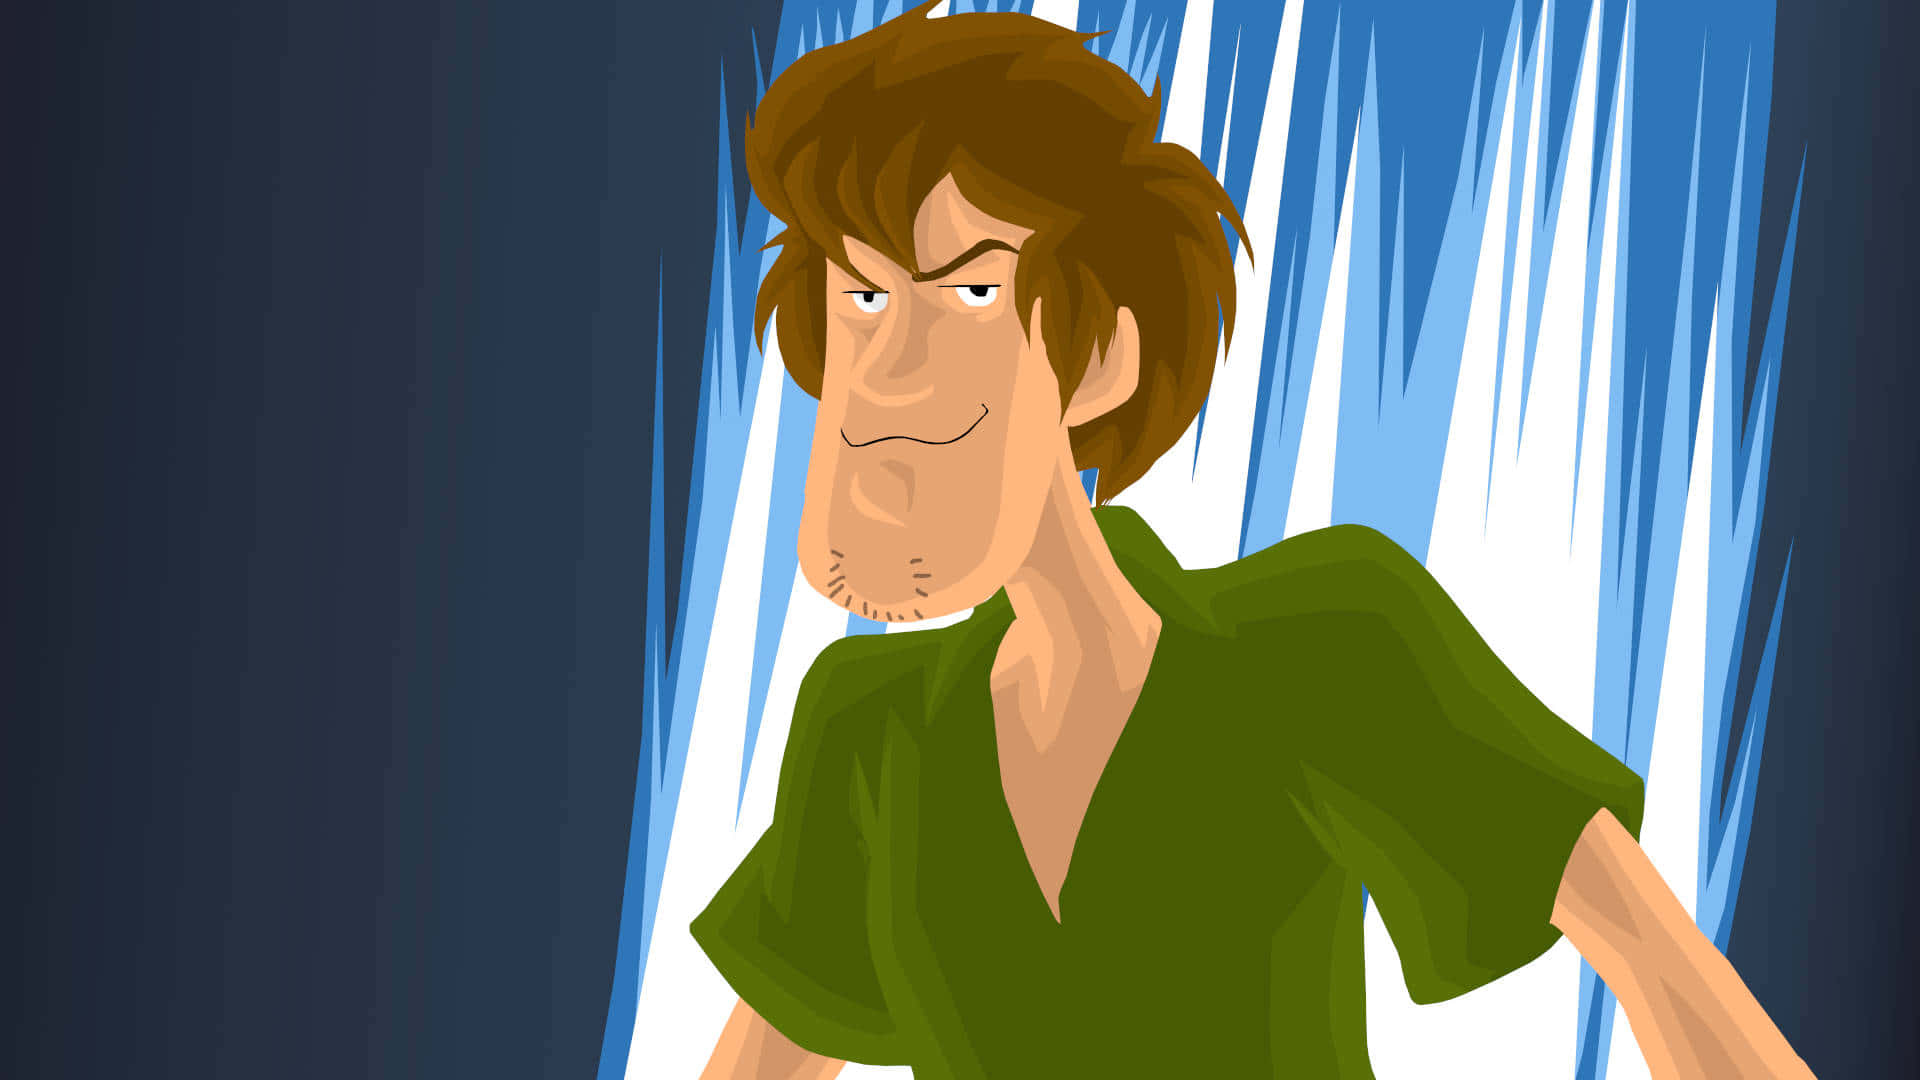 Entspannenmit Shaggy Rogers Wallpaper